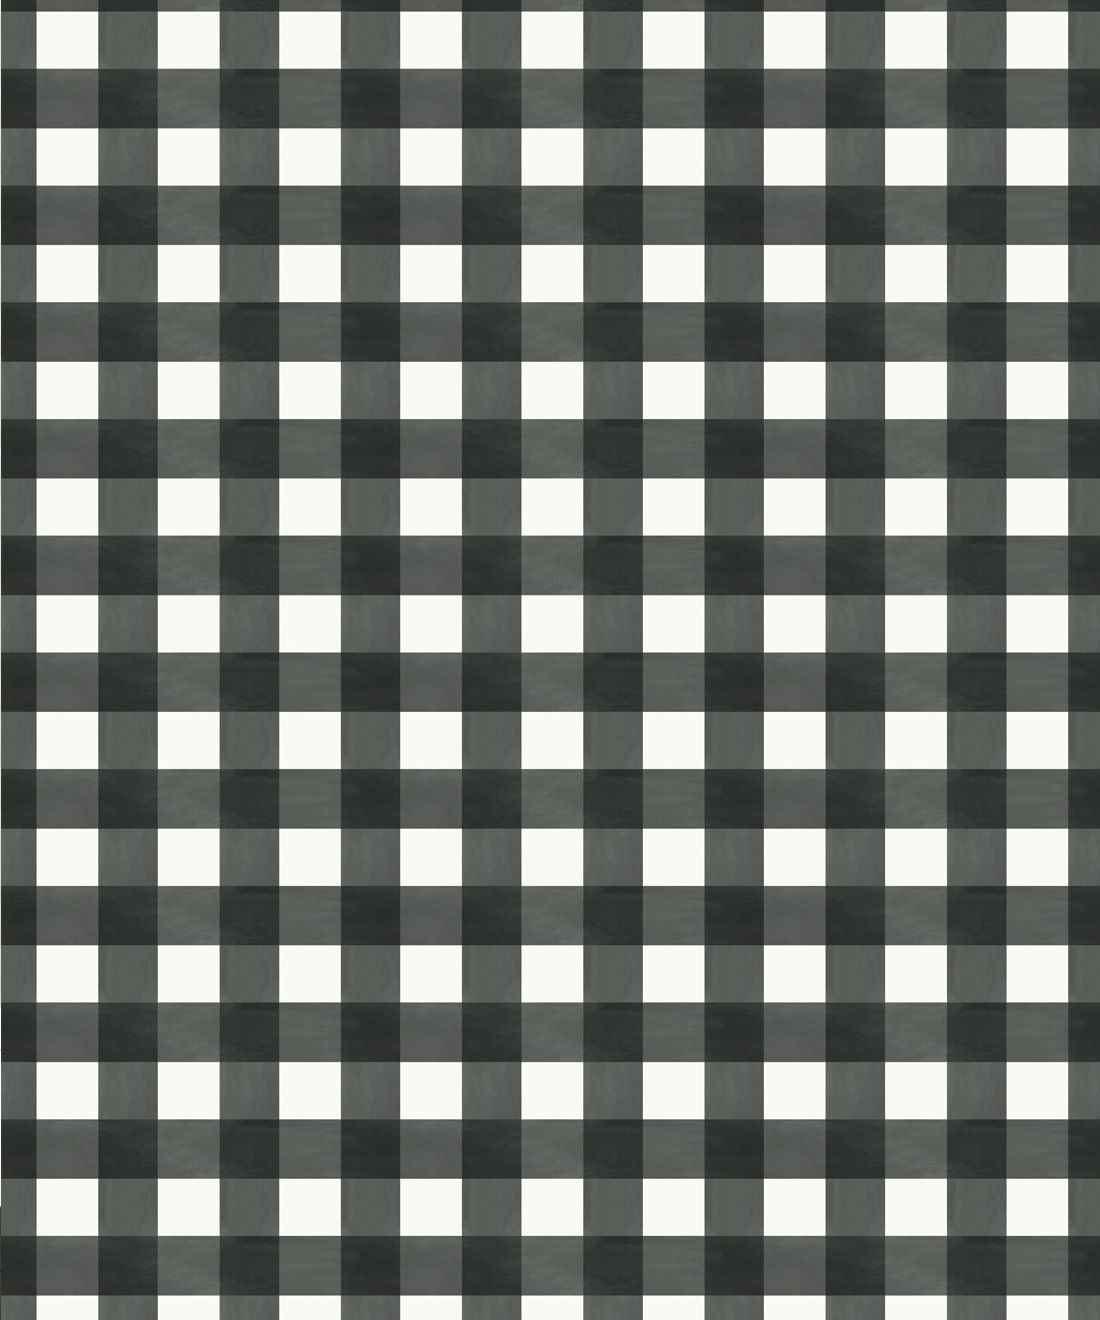 A black and white checkered pattern - Checkered